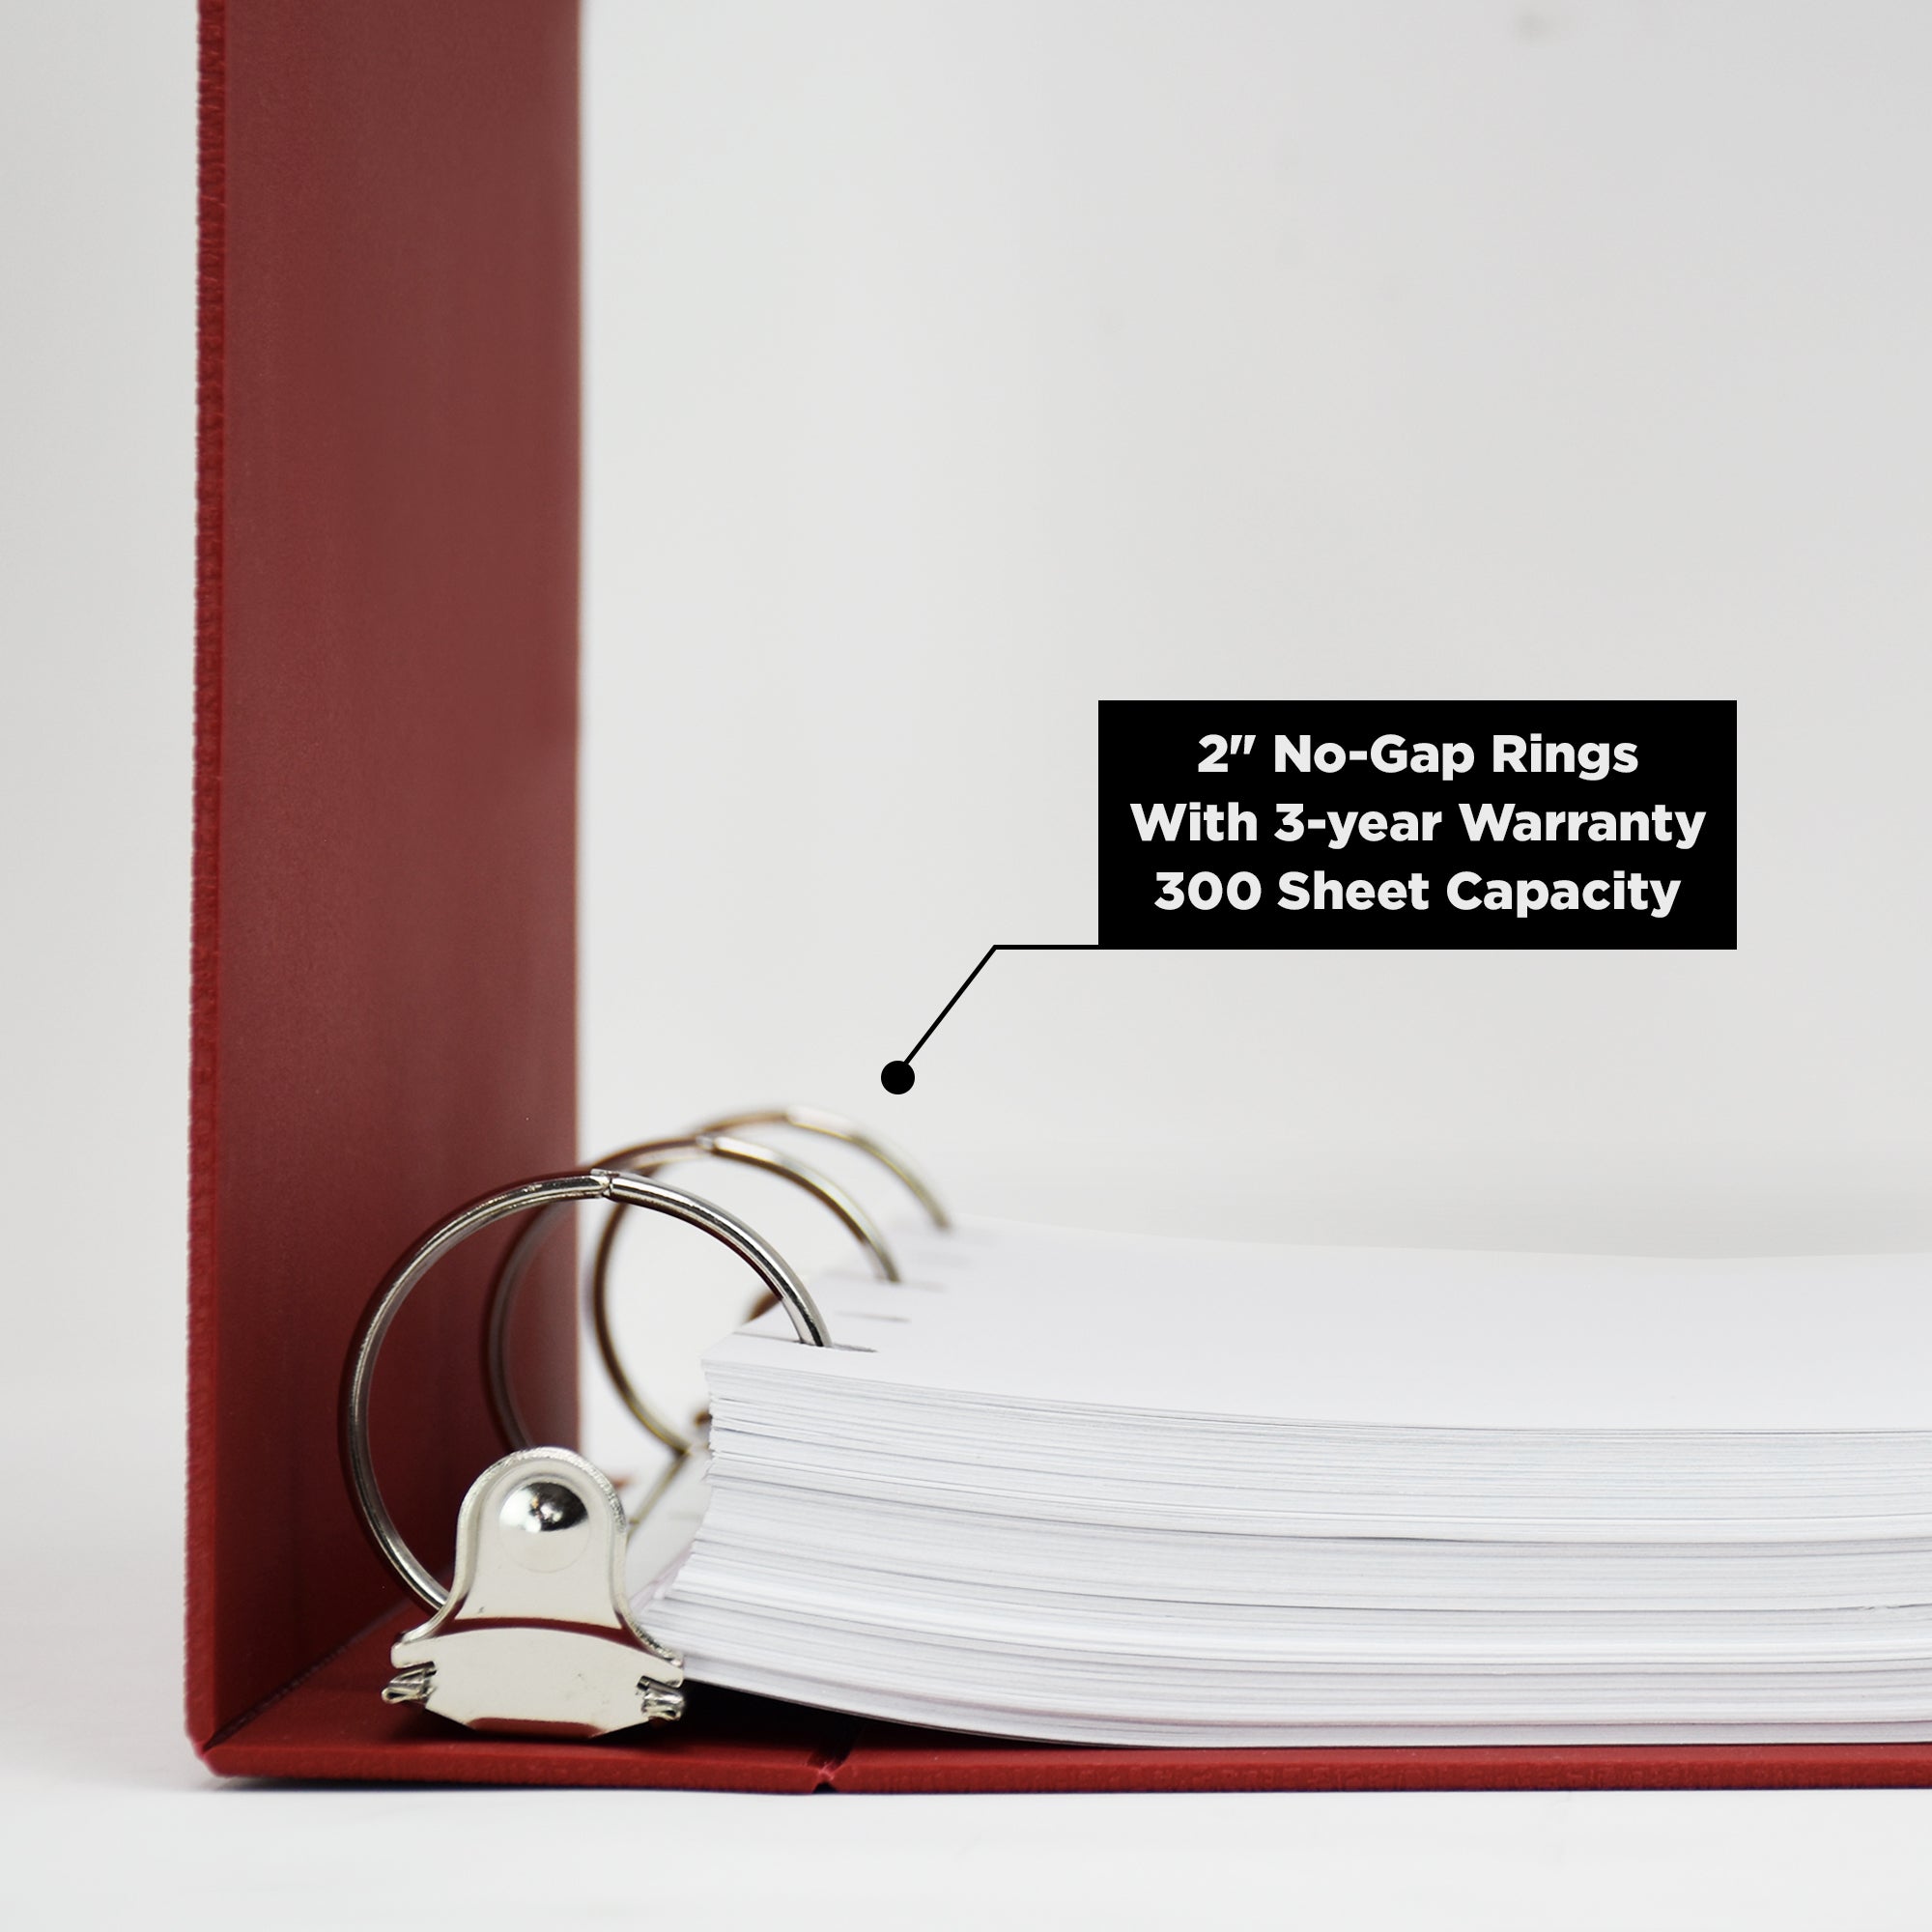 Heavy Duty 3-Ring Binder for Disaster Manuals - Side Opening